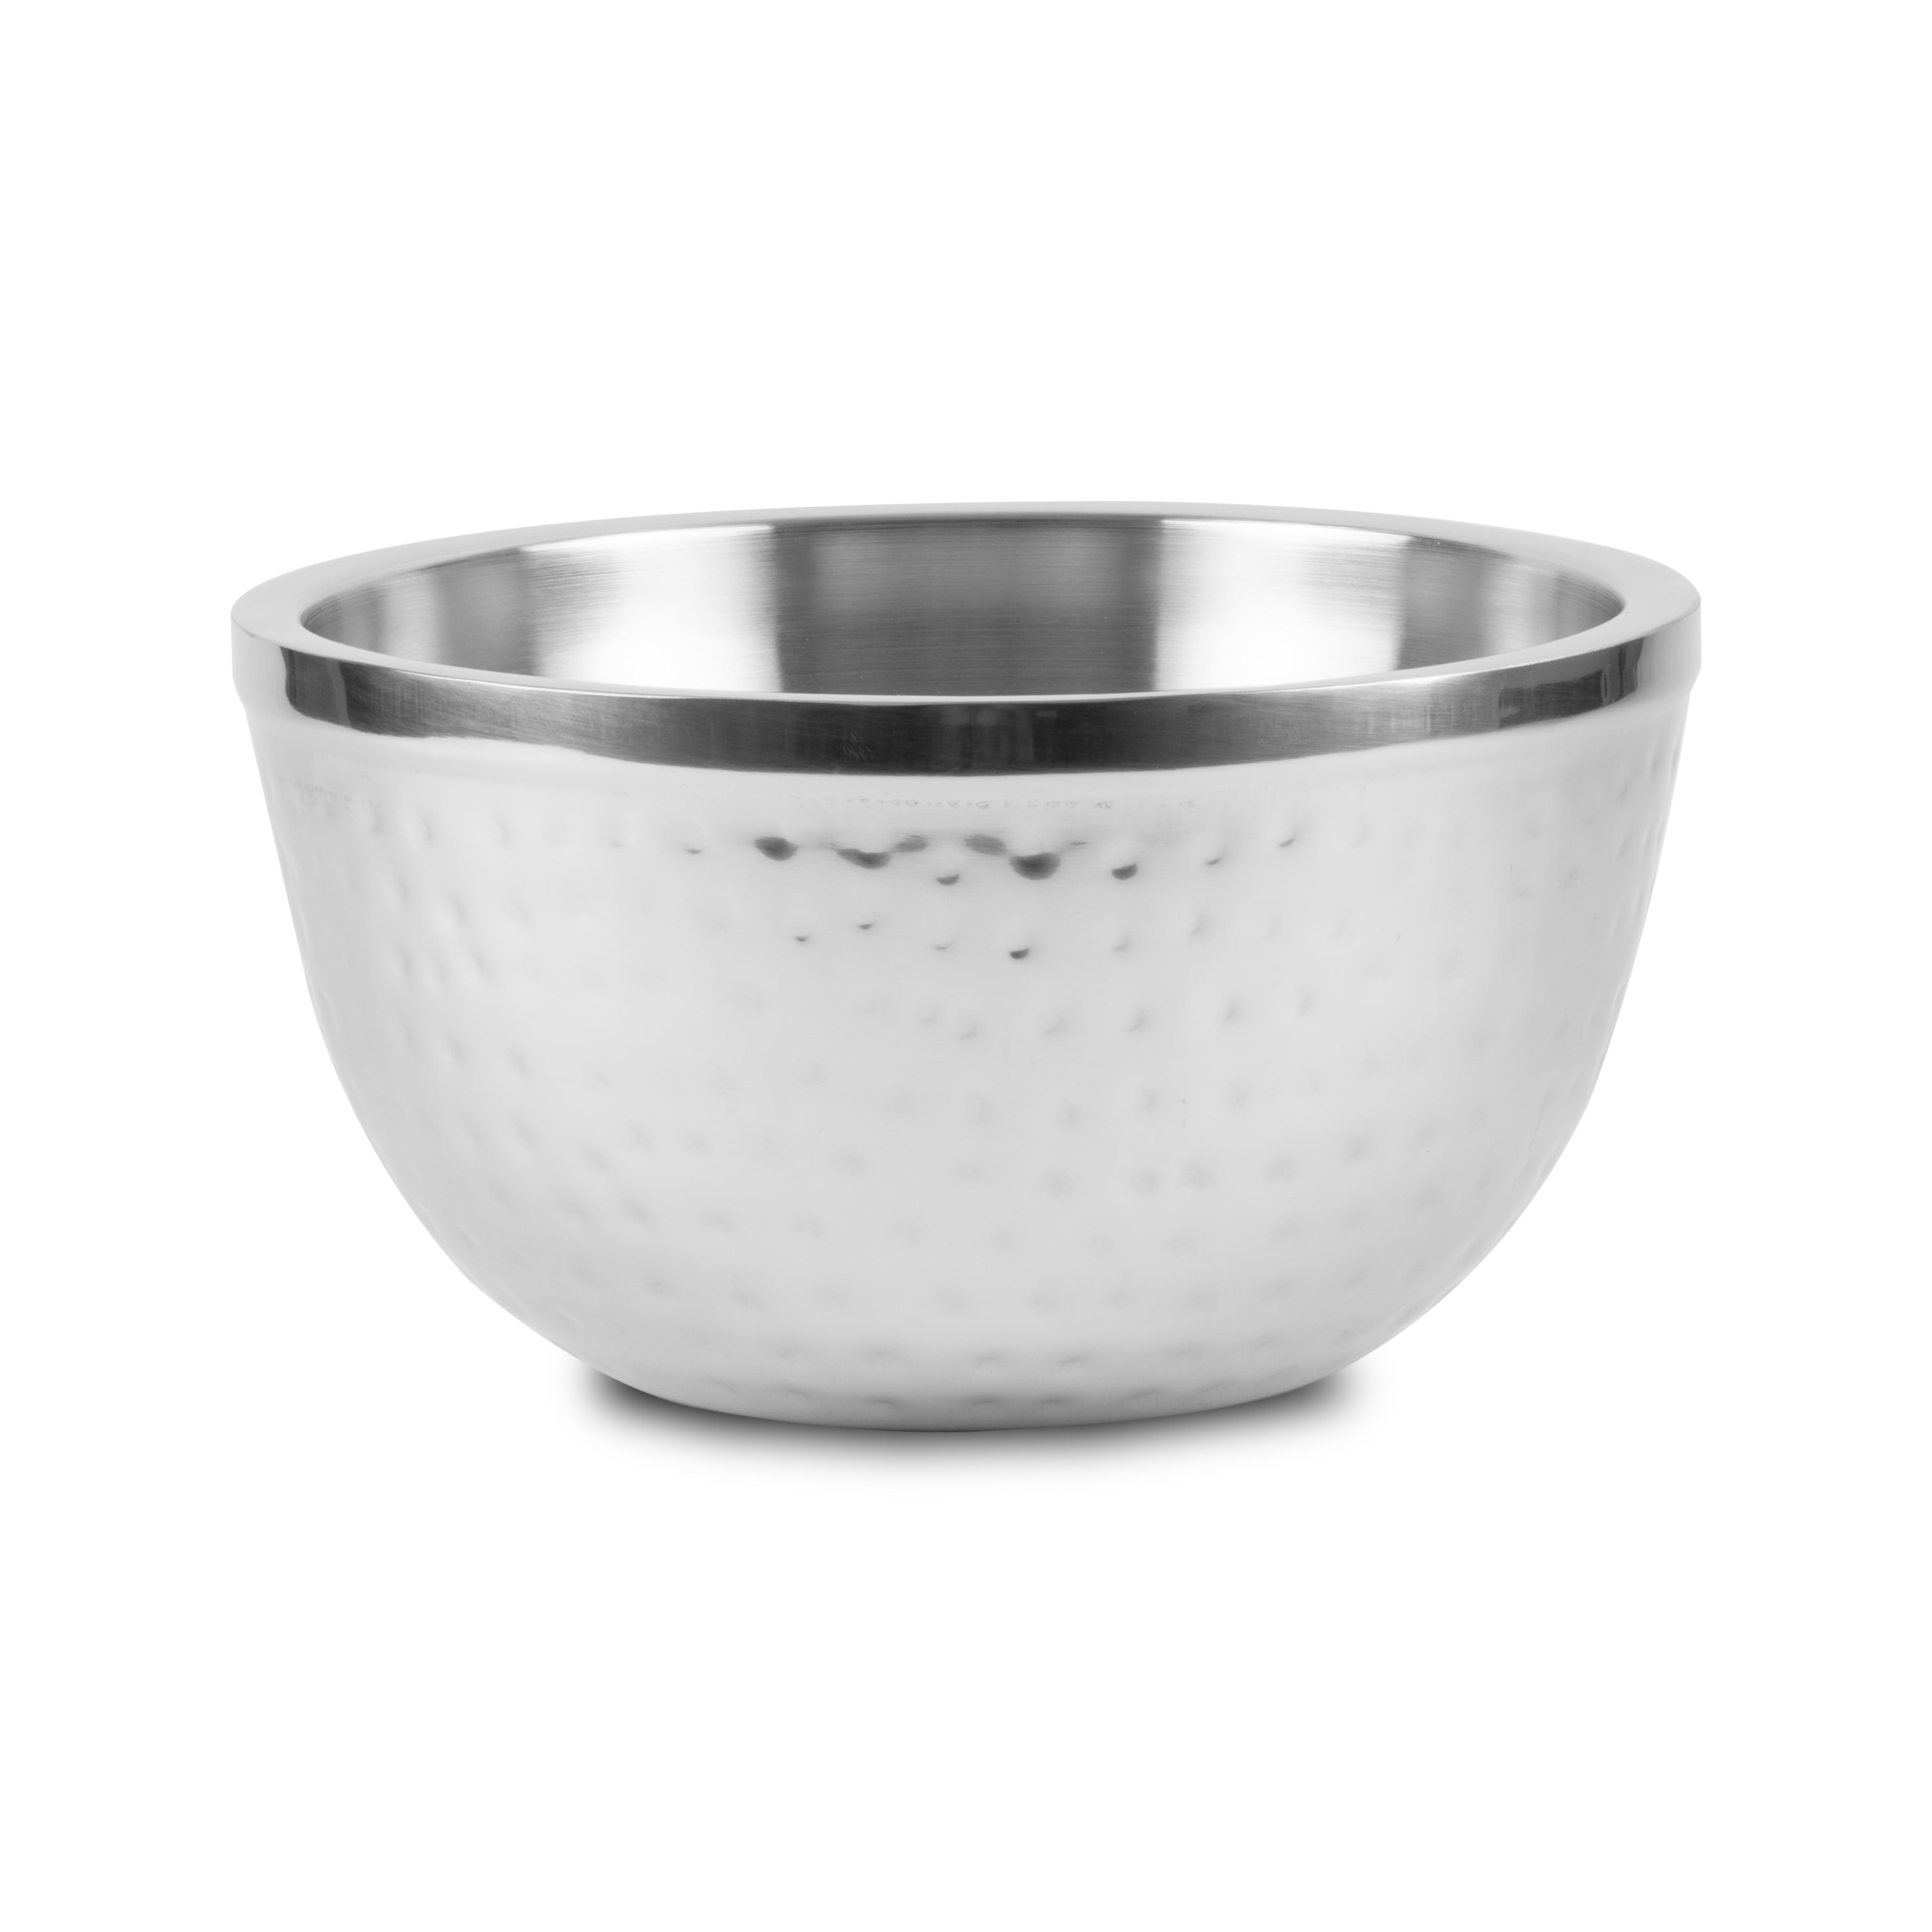 Double Wall Insulated Hot/Cold Serving Bowl with Lid - 3 qt